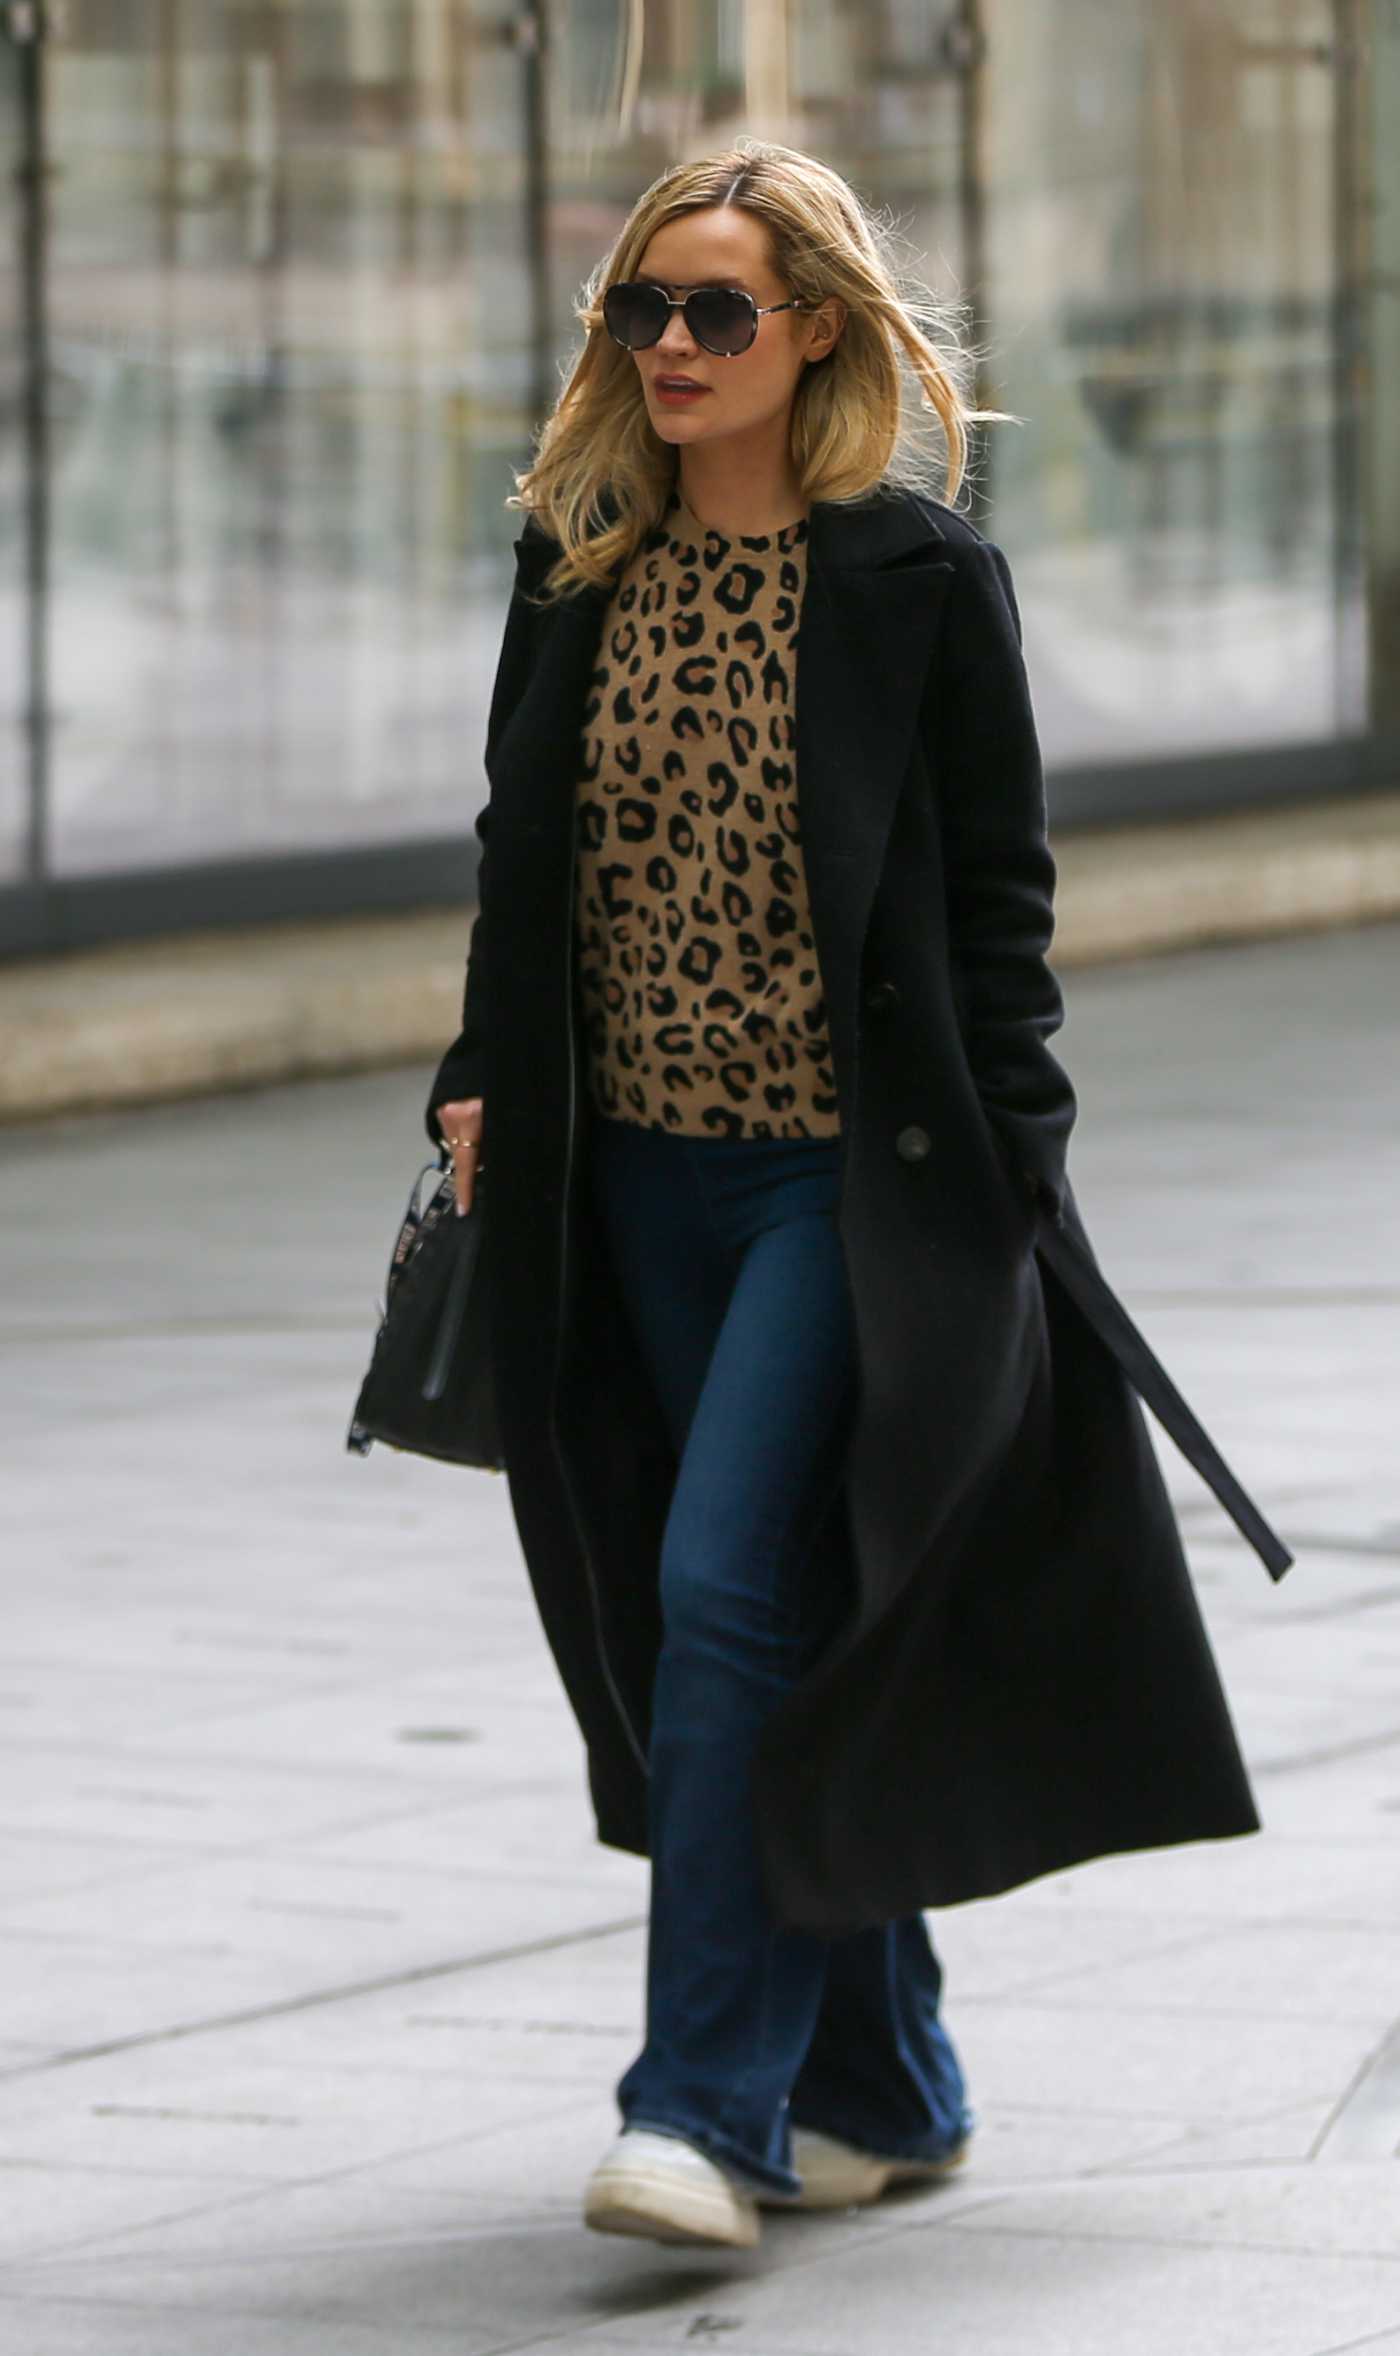 Laura Whitmore in a Black Coat Leaves the BBC New Broadcasting House in London 03/13/2022